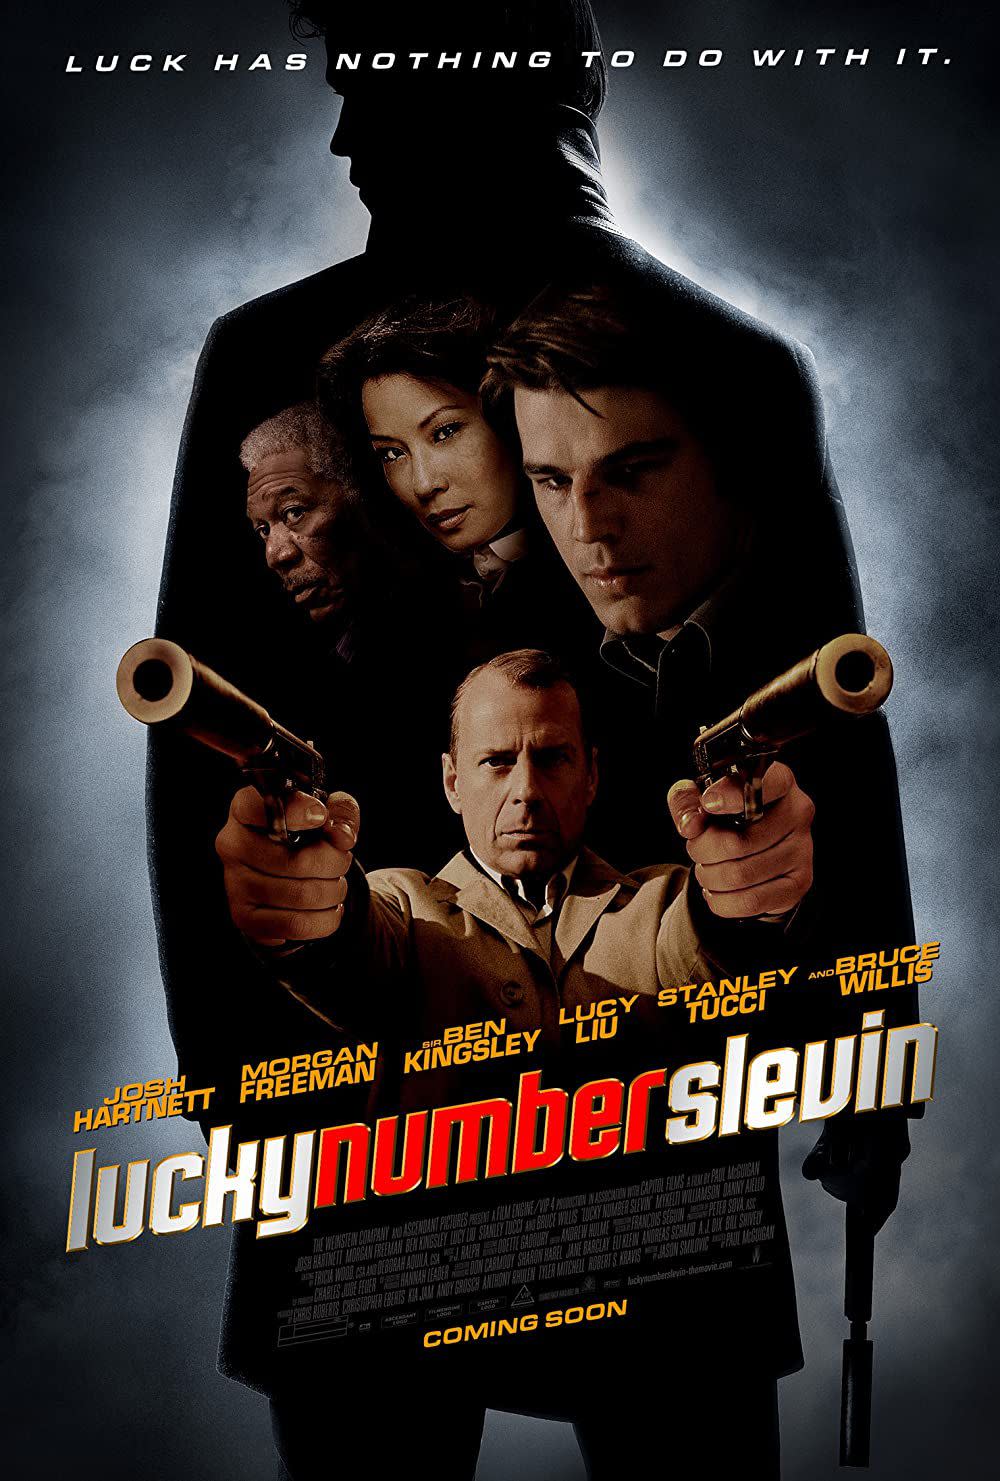 the poster for lucky number slevin with josh hartnett